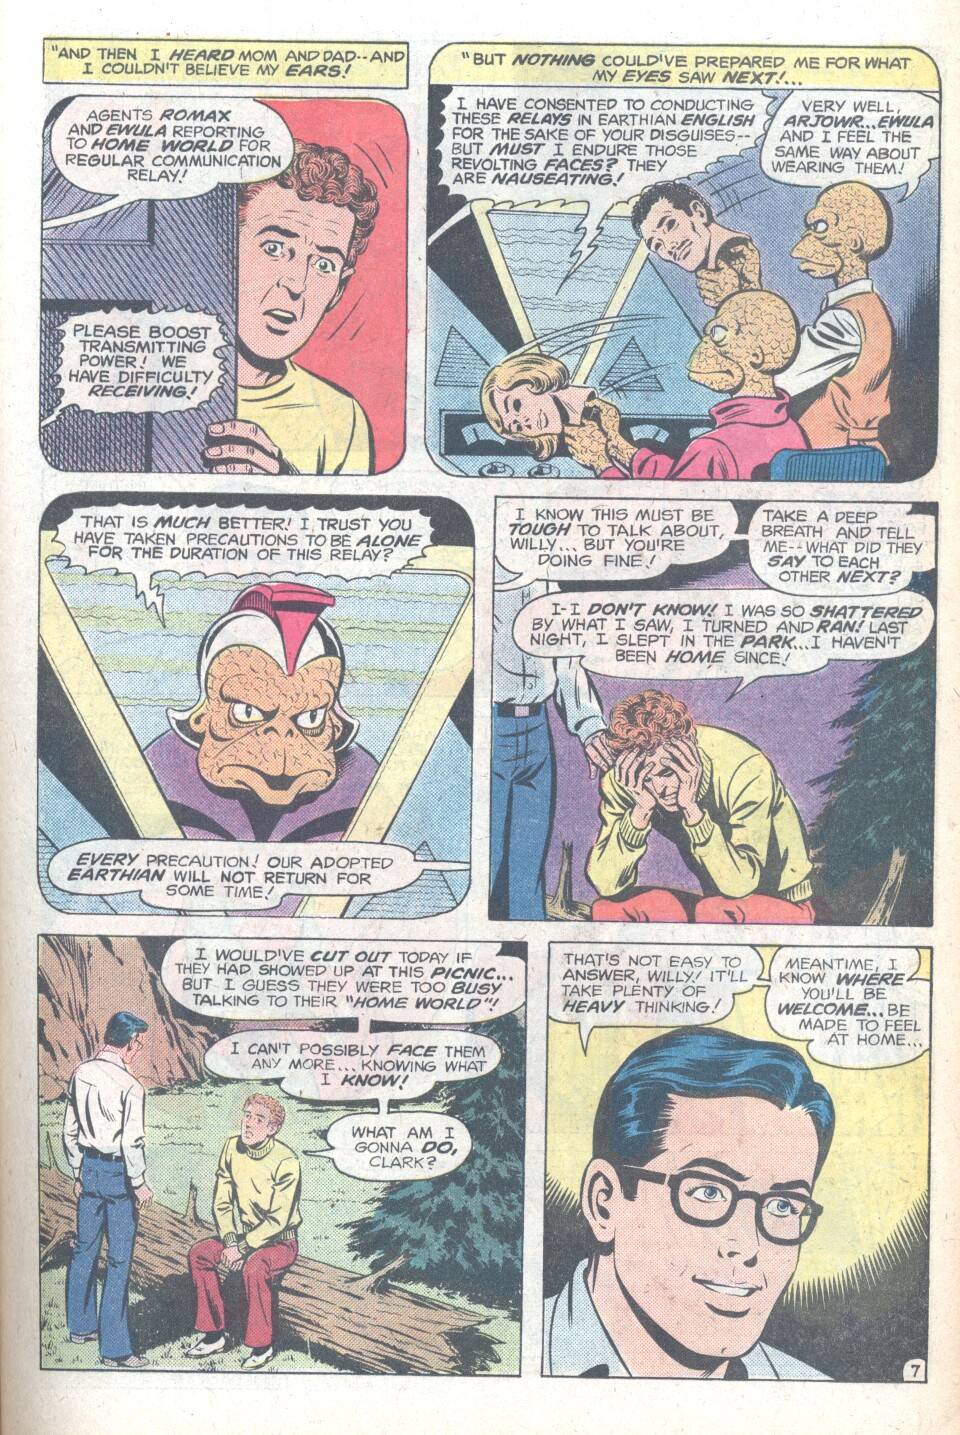 The New Adventures of Superboy 7 Page 7